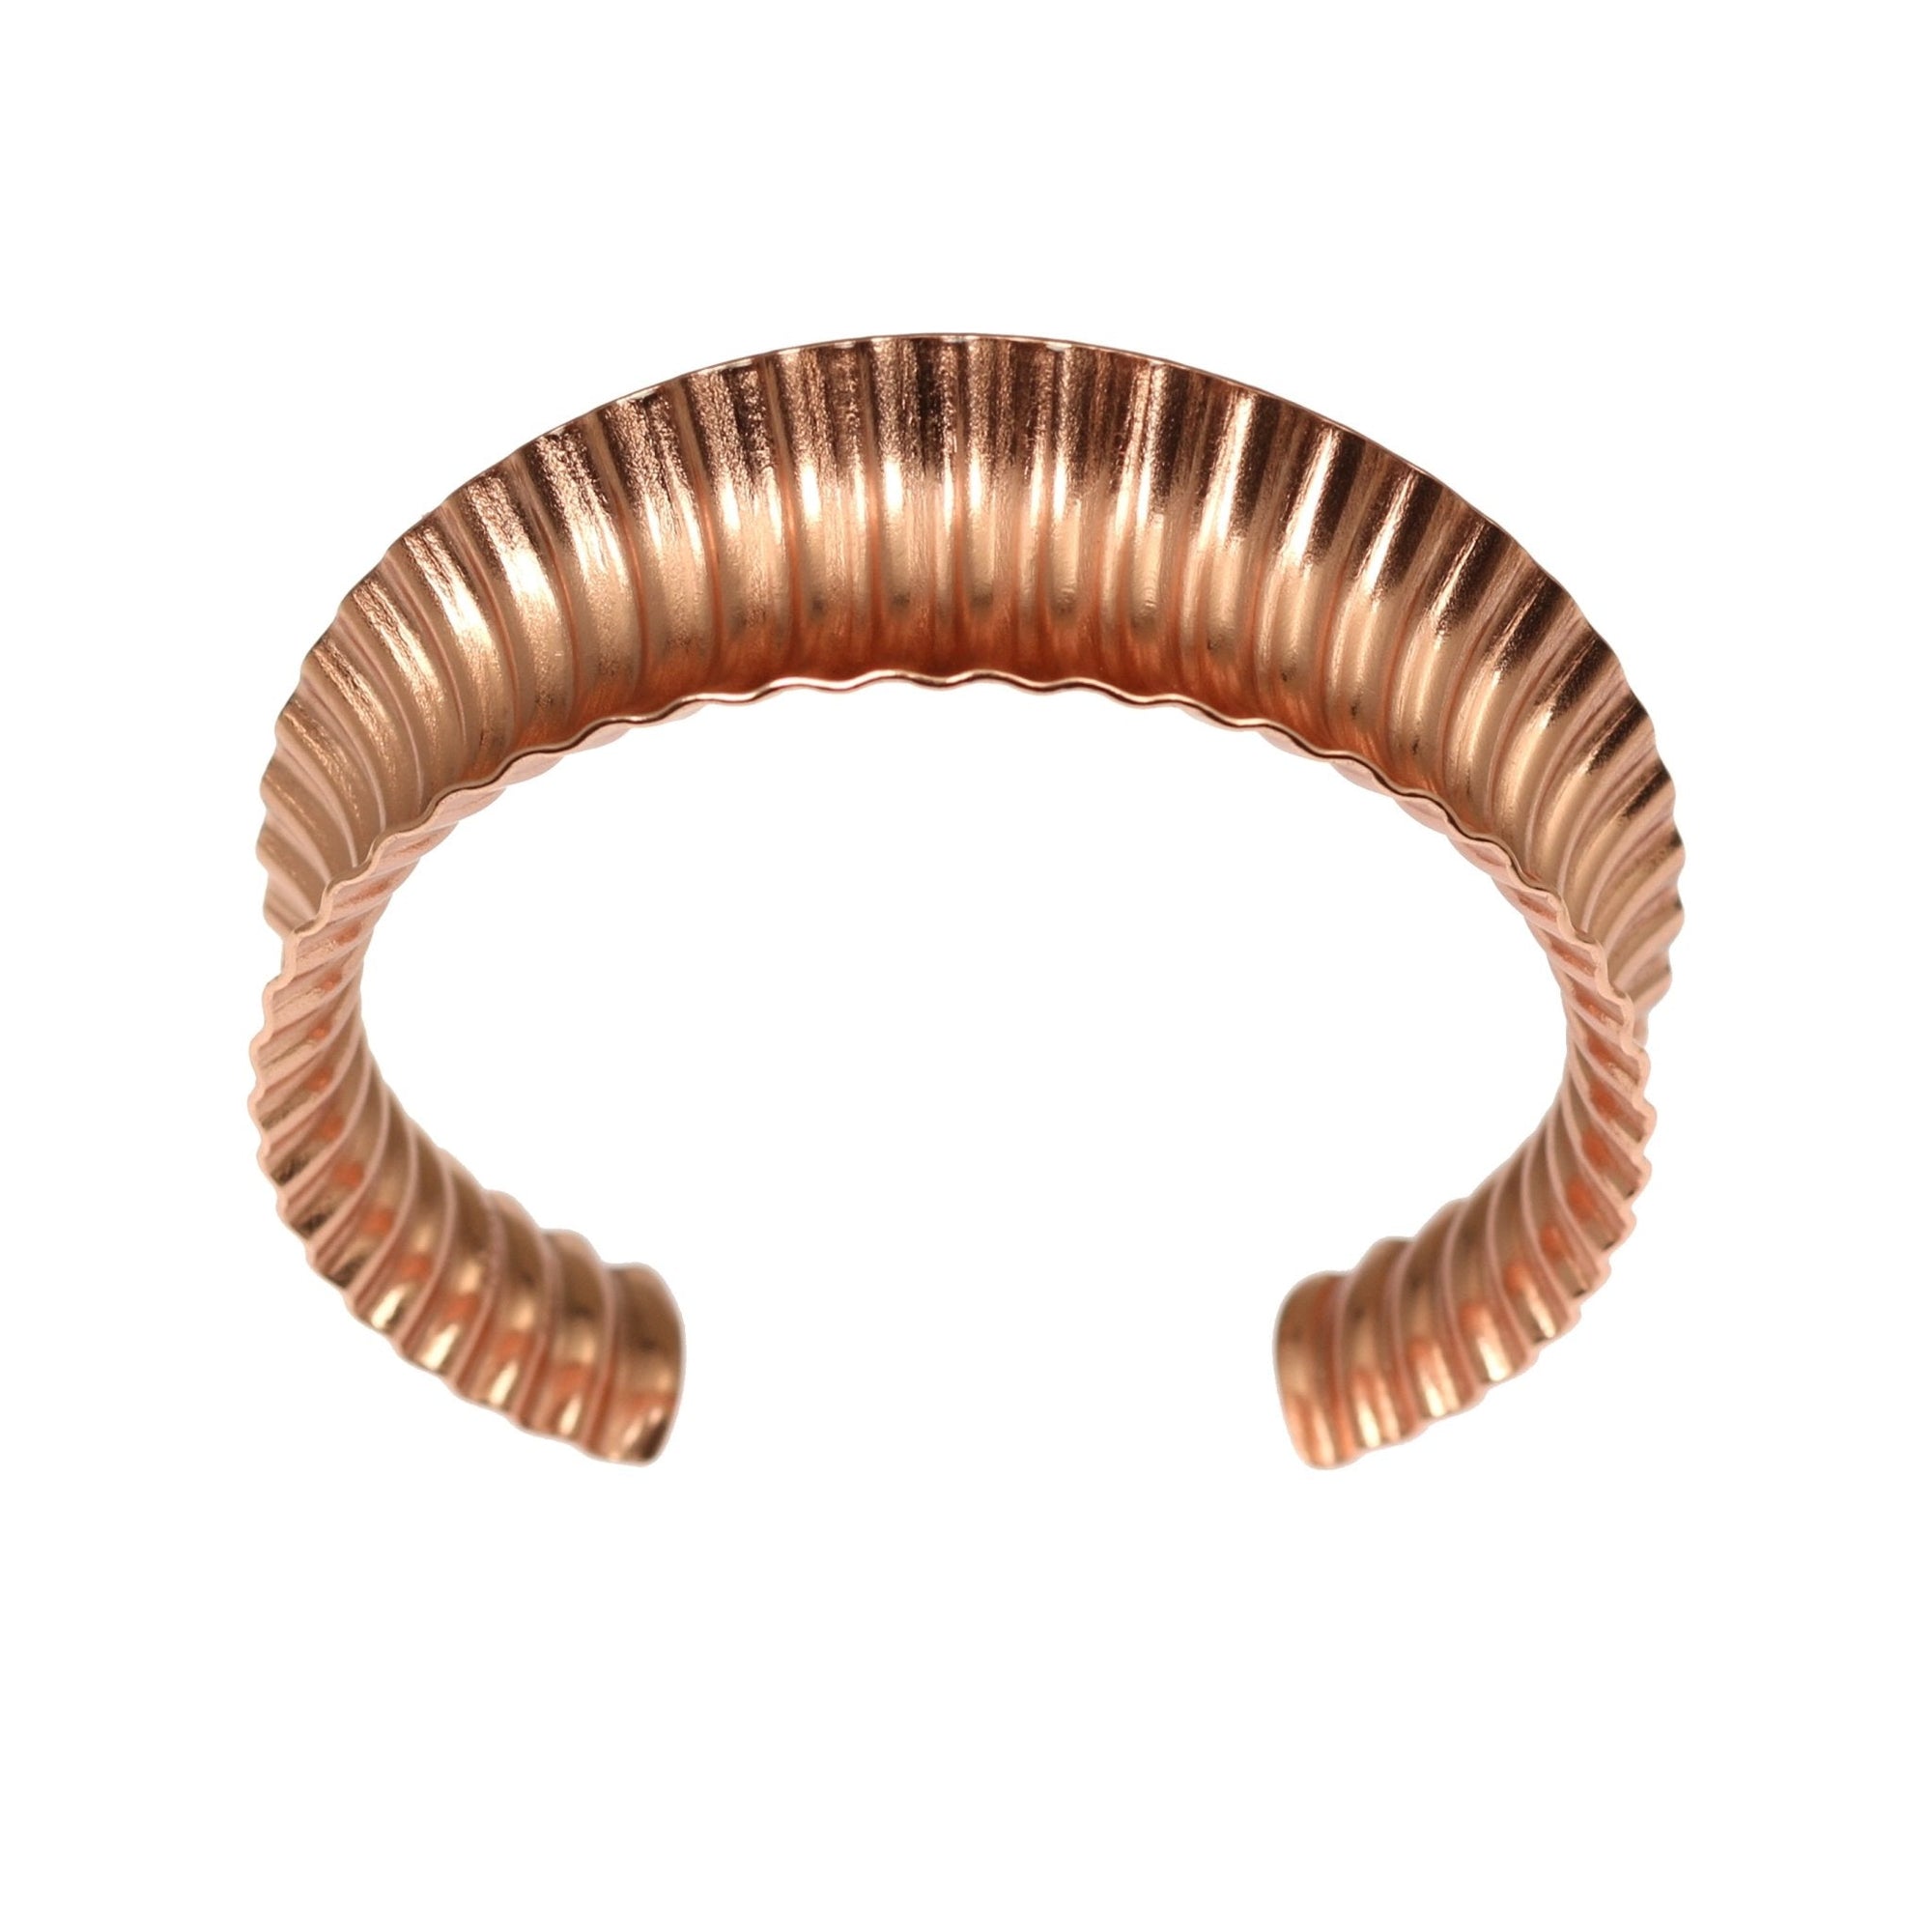 Detail View of Corrugated Copper Anticlastic Tapered Cuff